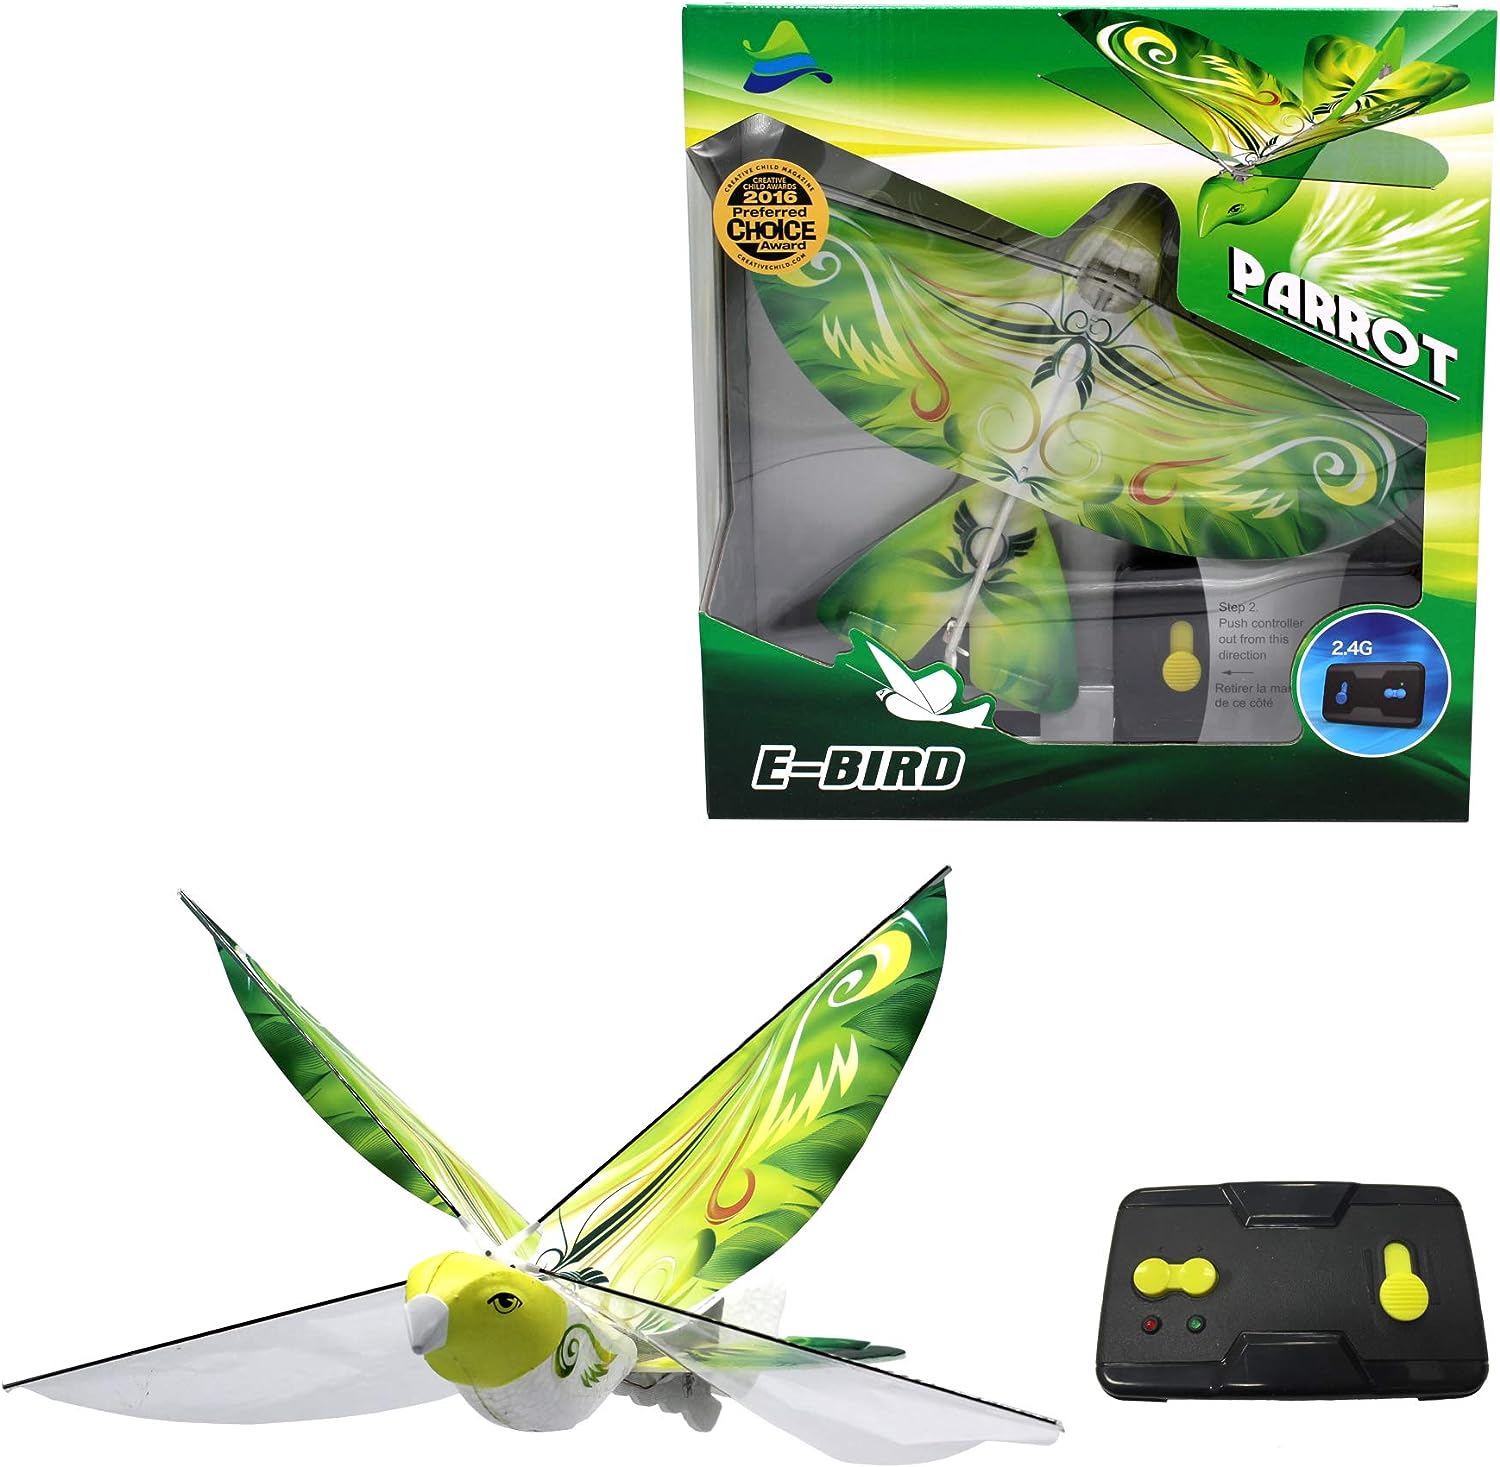 eBird Green Parrot – Flying RC Bird Drone Toy for Kids. Indoor / Outdoor Remote Control Bionic Flapping Wings Bird Helicopter. USB Recharging.